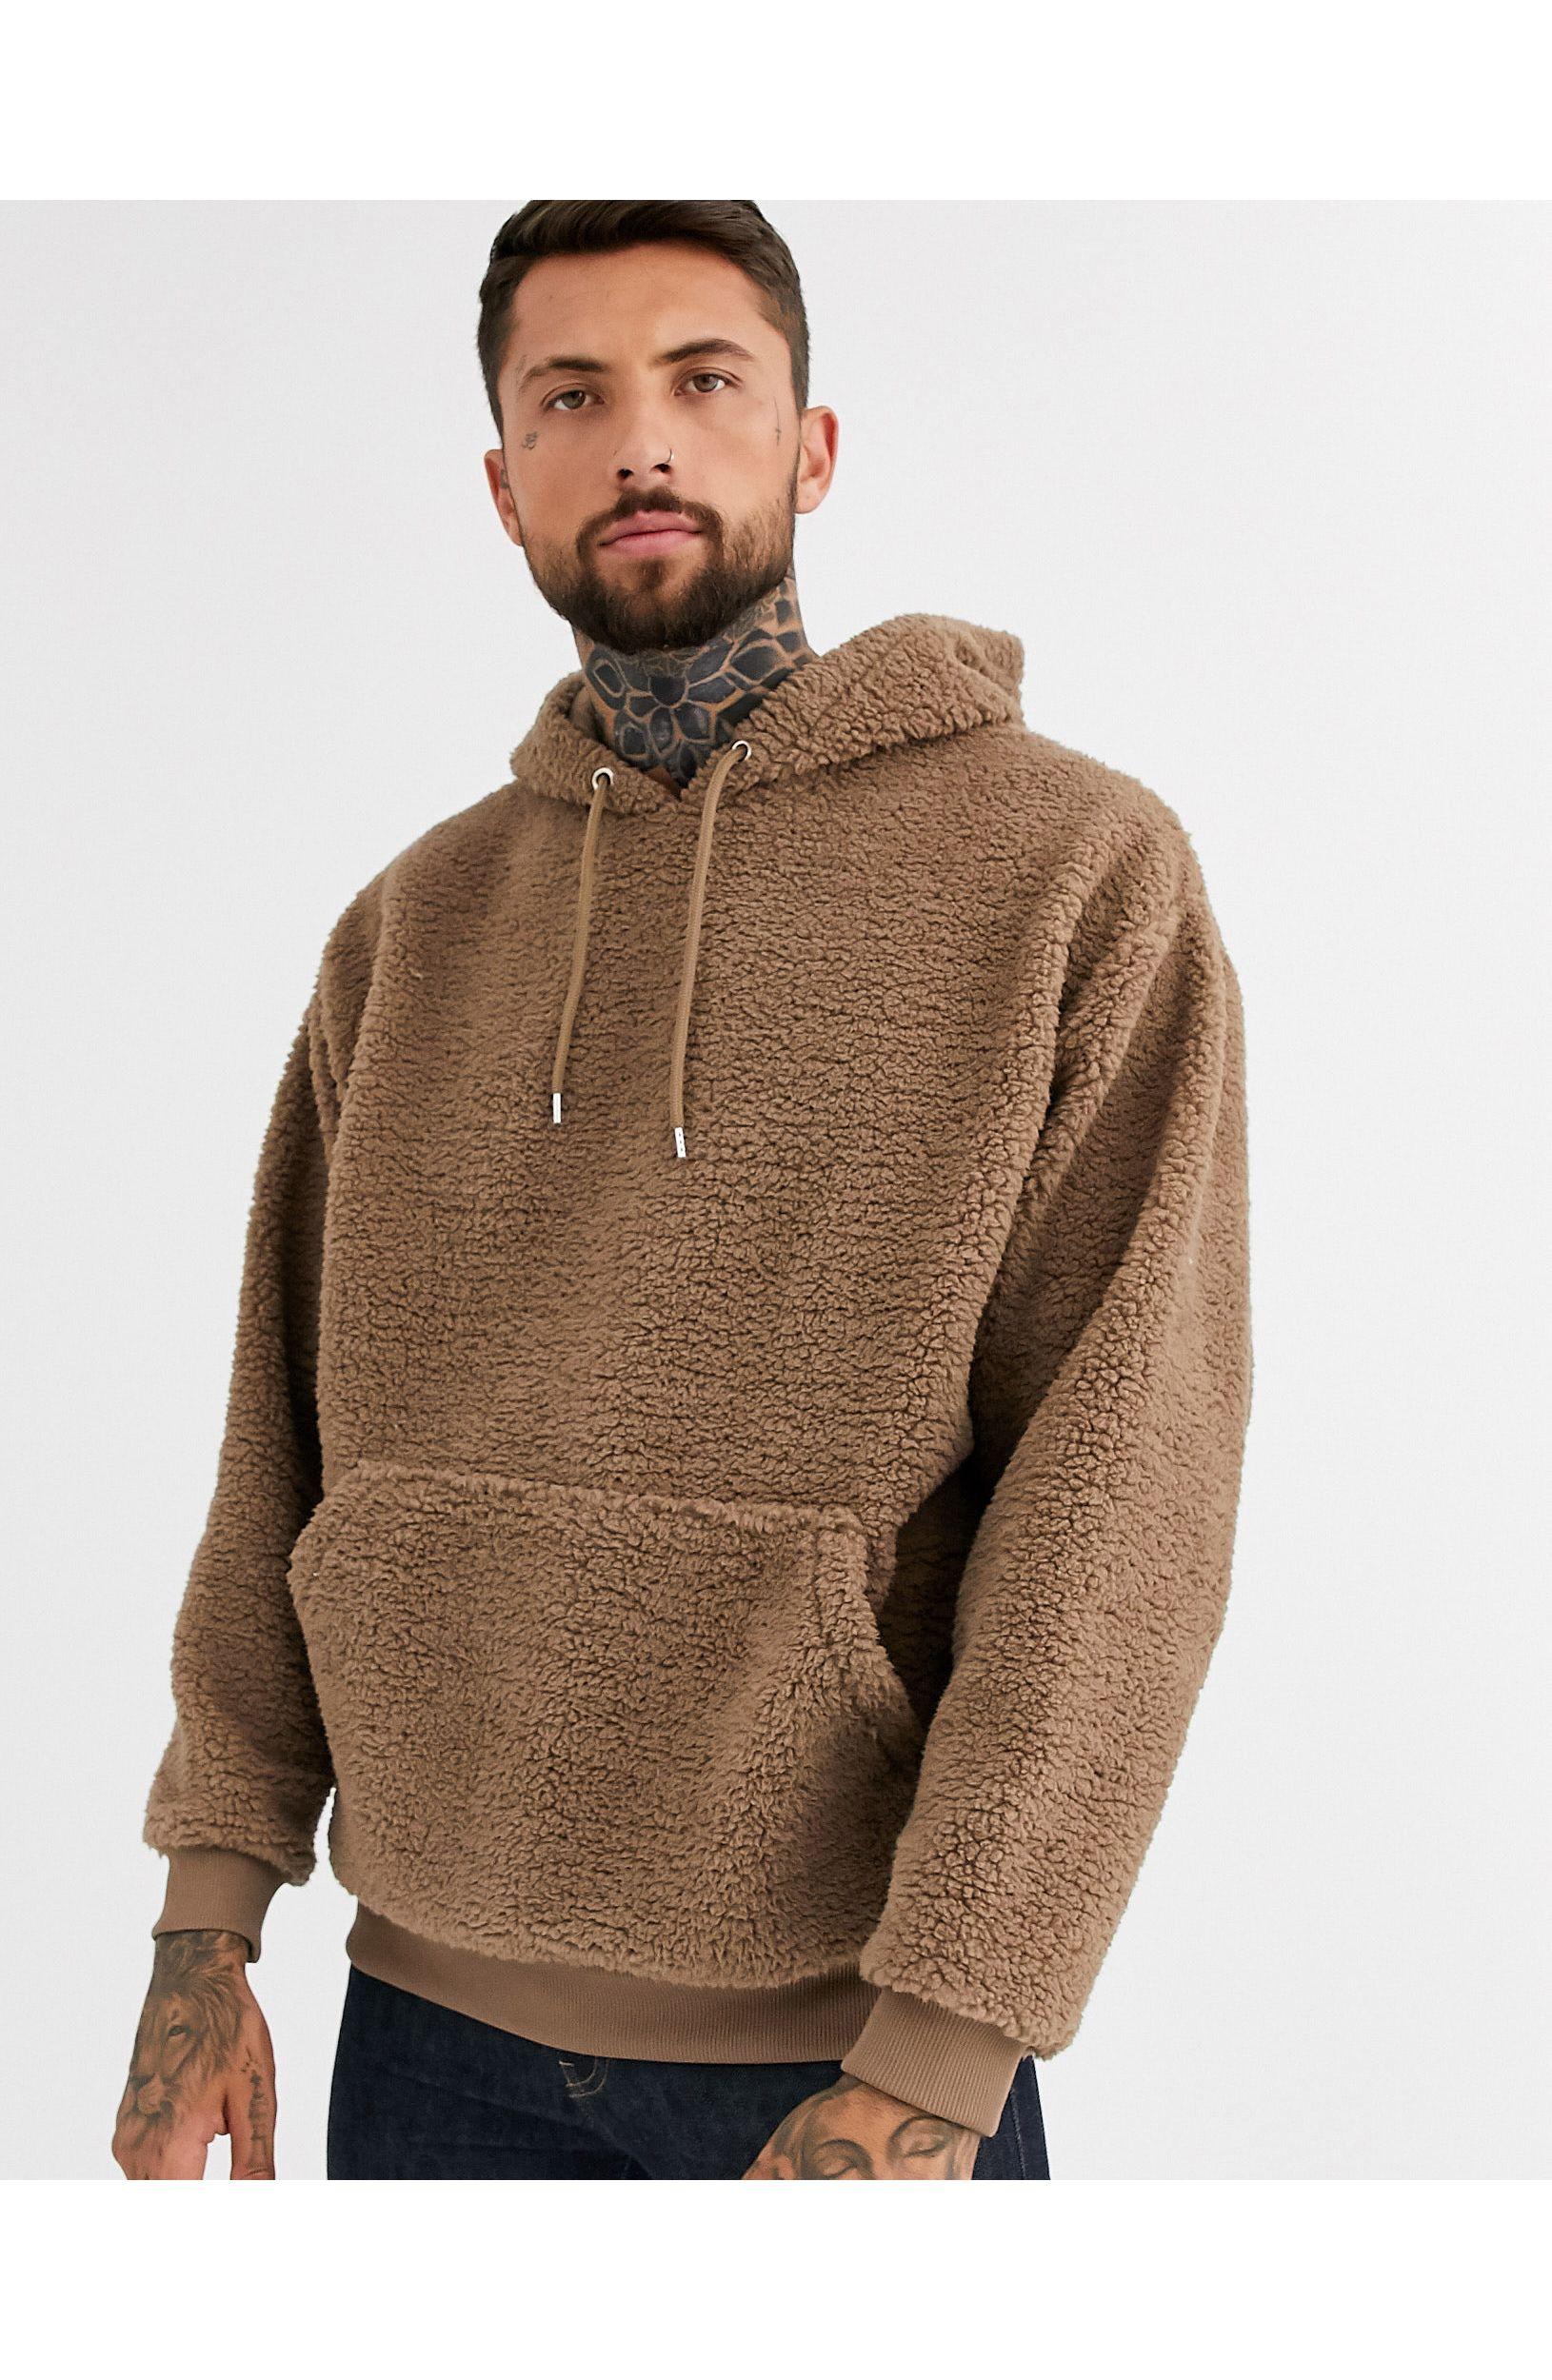 ASOS Synthetic Oversized Hoodie in Brown for Men - Lyst